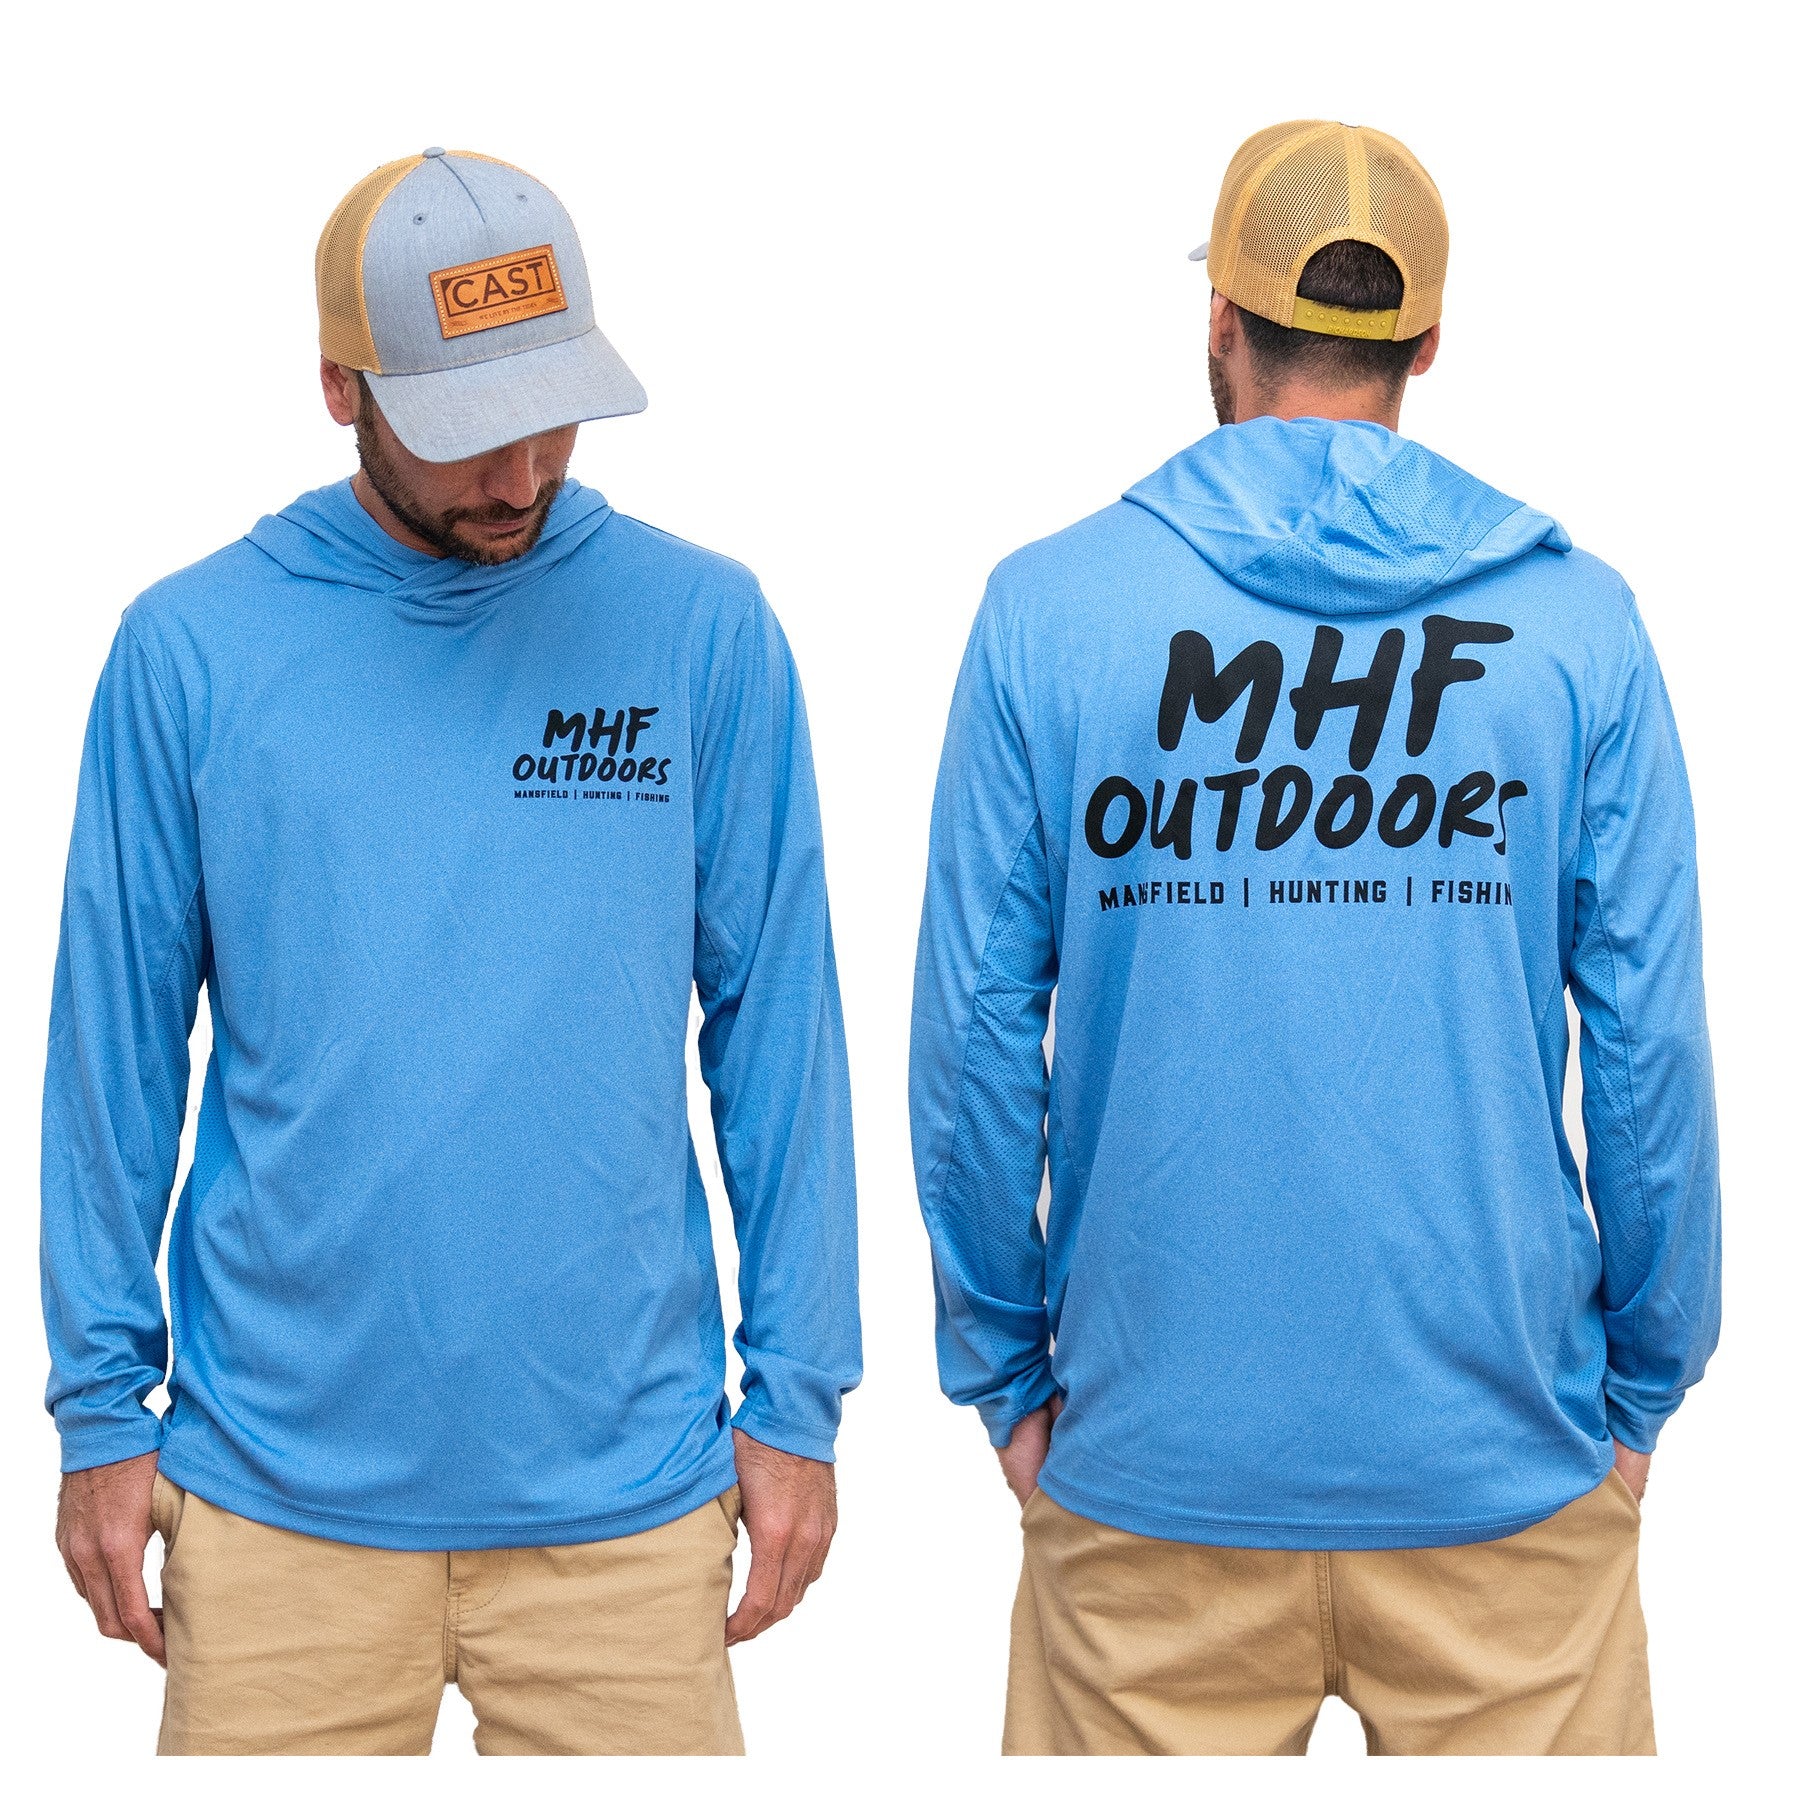 MHF x Cast Revive UPF50+ Lightweight Performance Fishing Hooded Jersey - S / LIGHT BLUE - Mansfield Hunting & Fishing - Products to prepare for Corona Virus